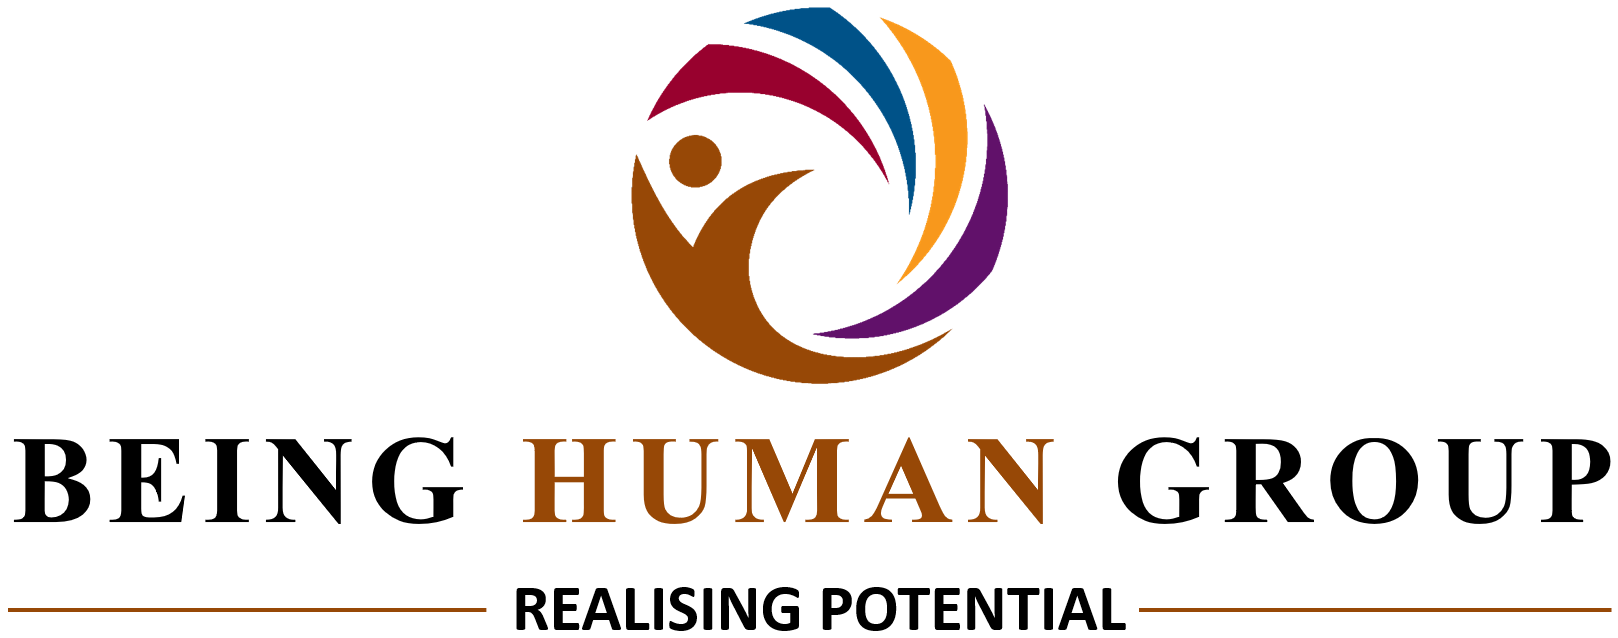 Being Human Group